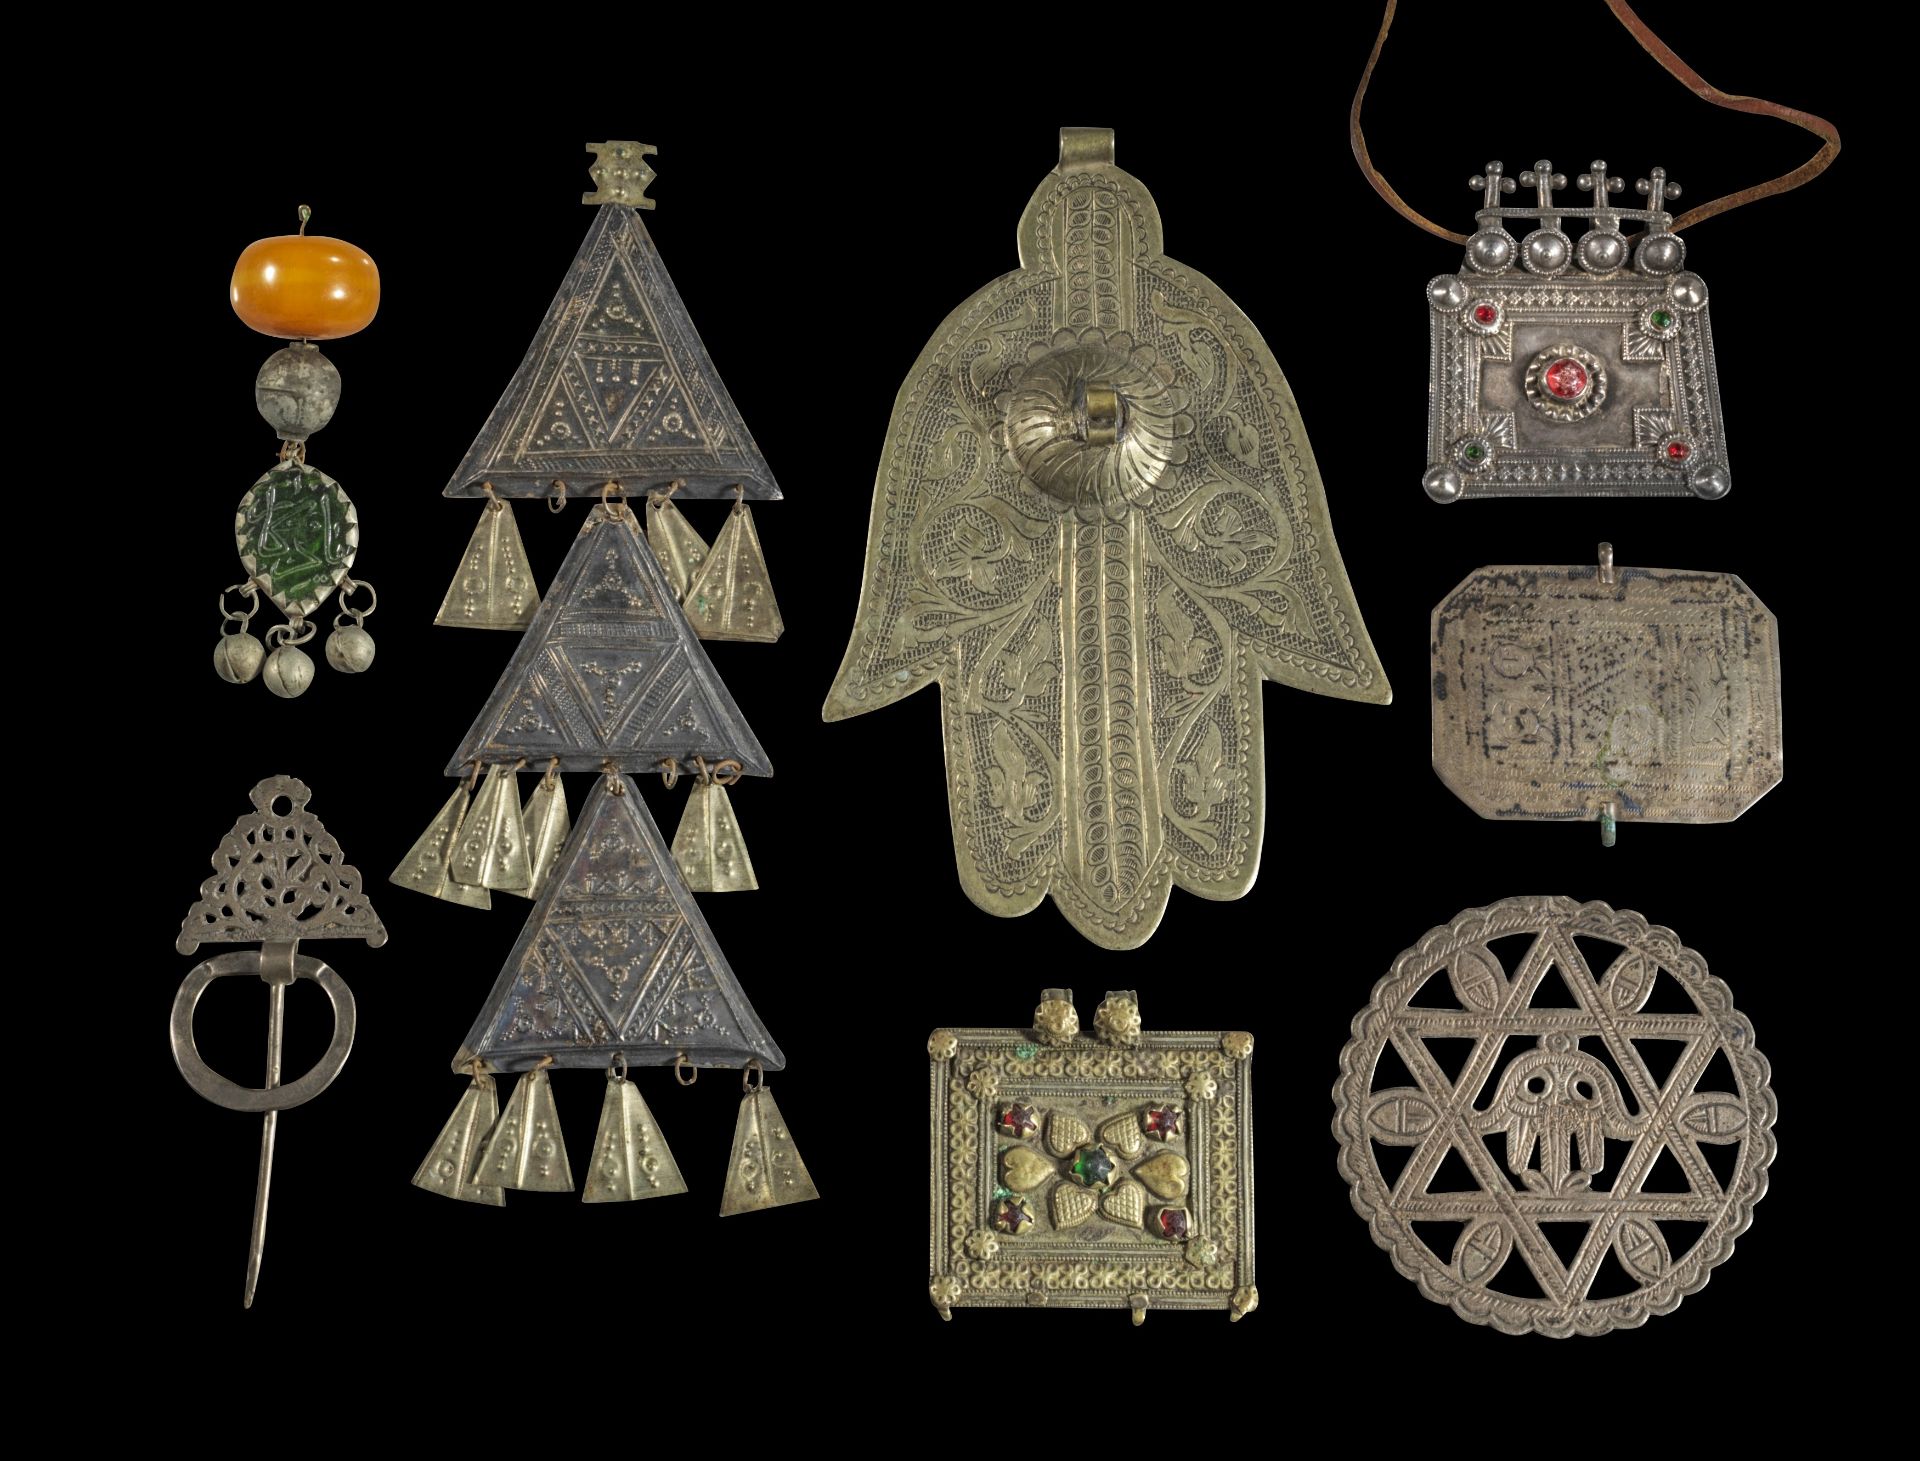 Collection of amulets and amulet containers from Yemen and Saudi Arabia. - Image 2 of 2